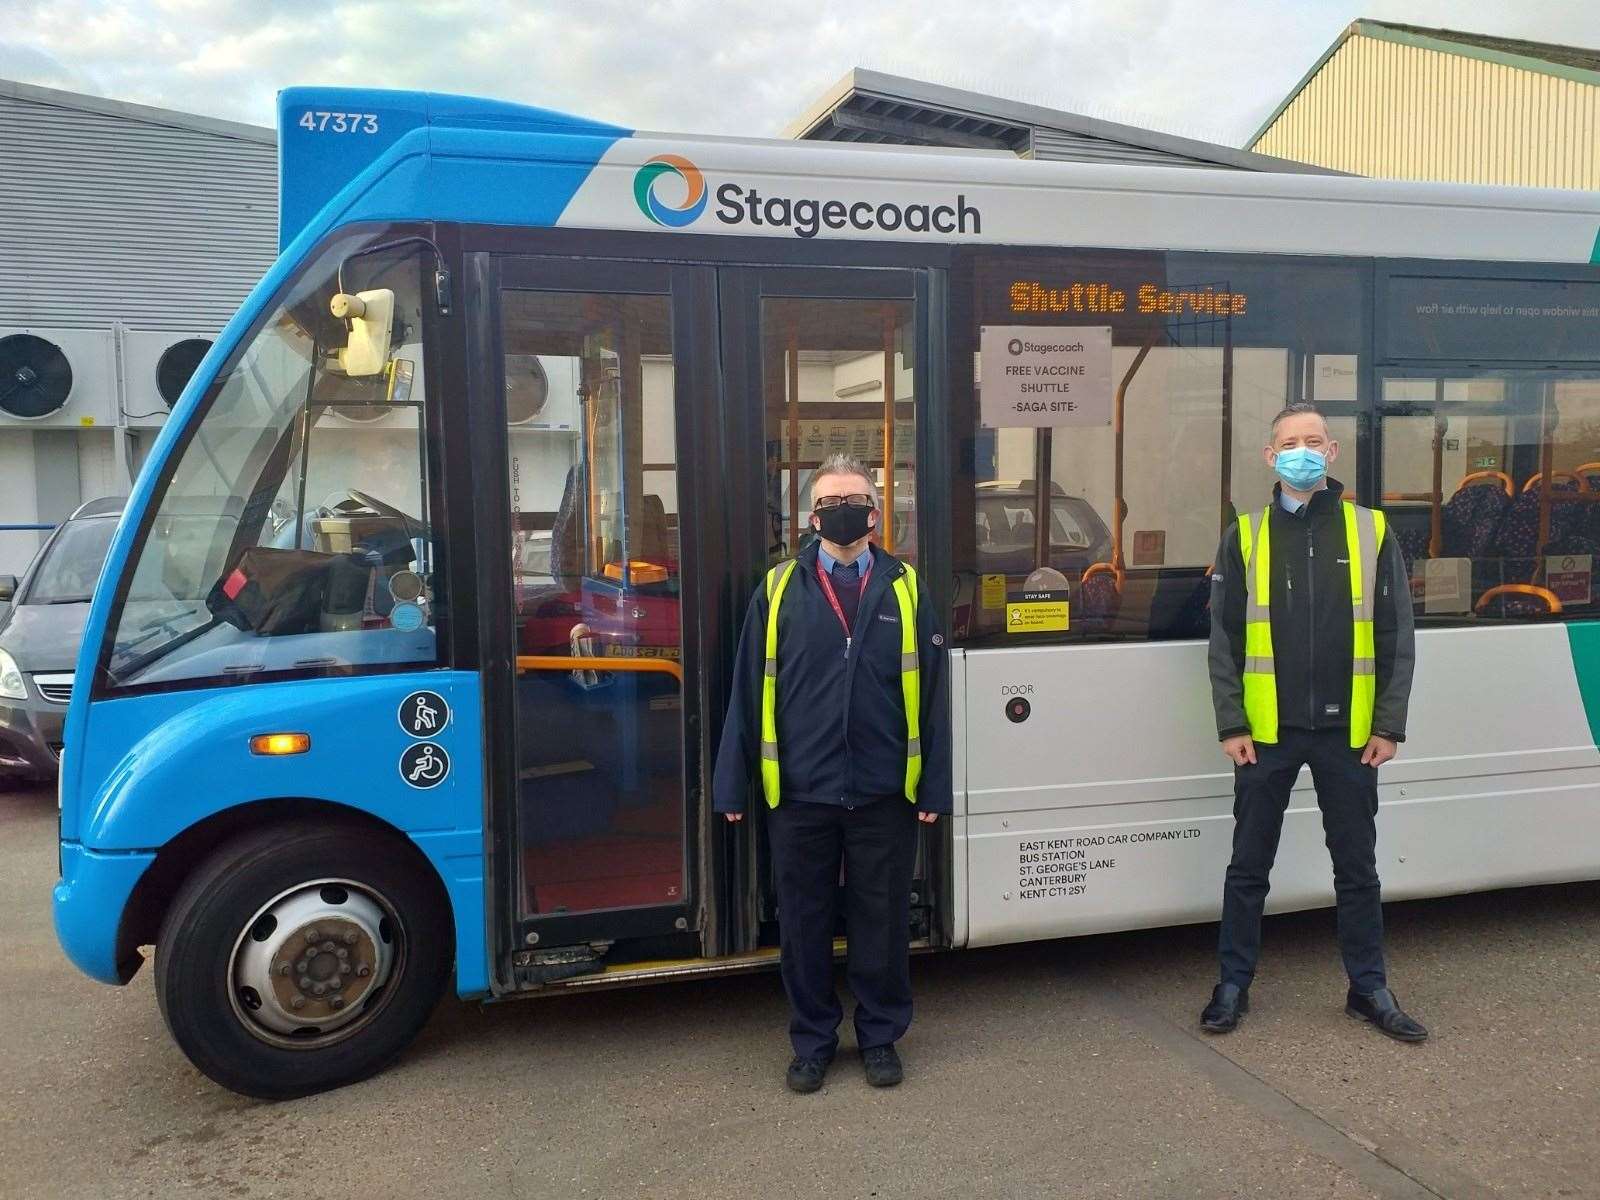 Free shuttle service launched by Stagecoach for people getting Covid